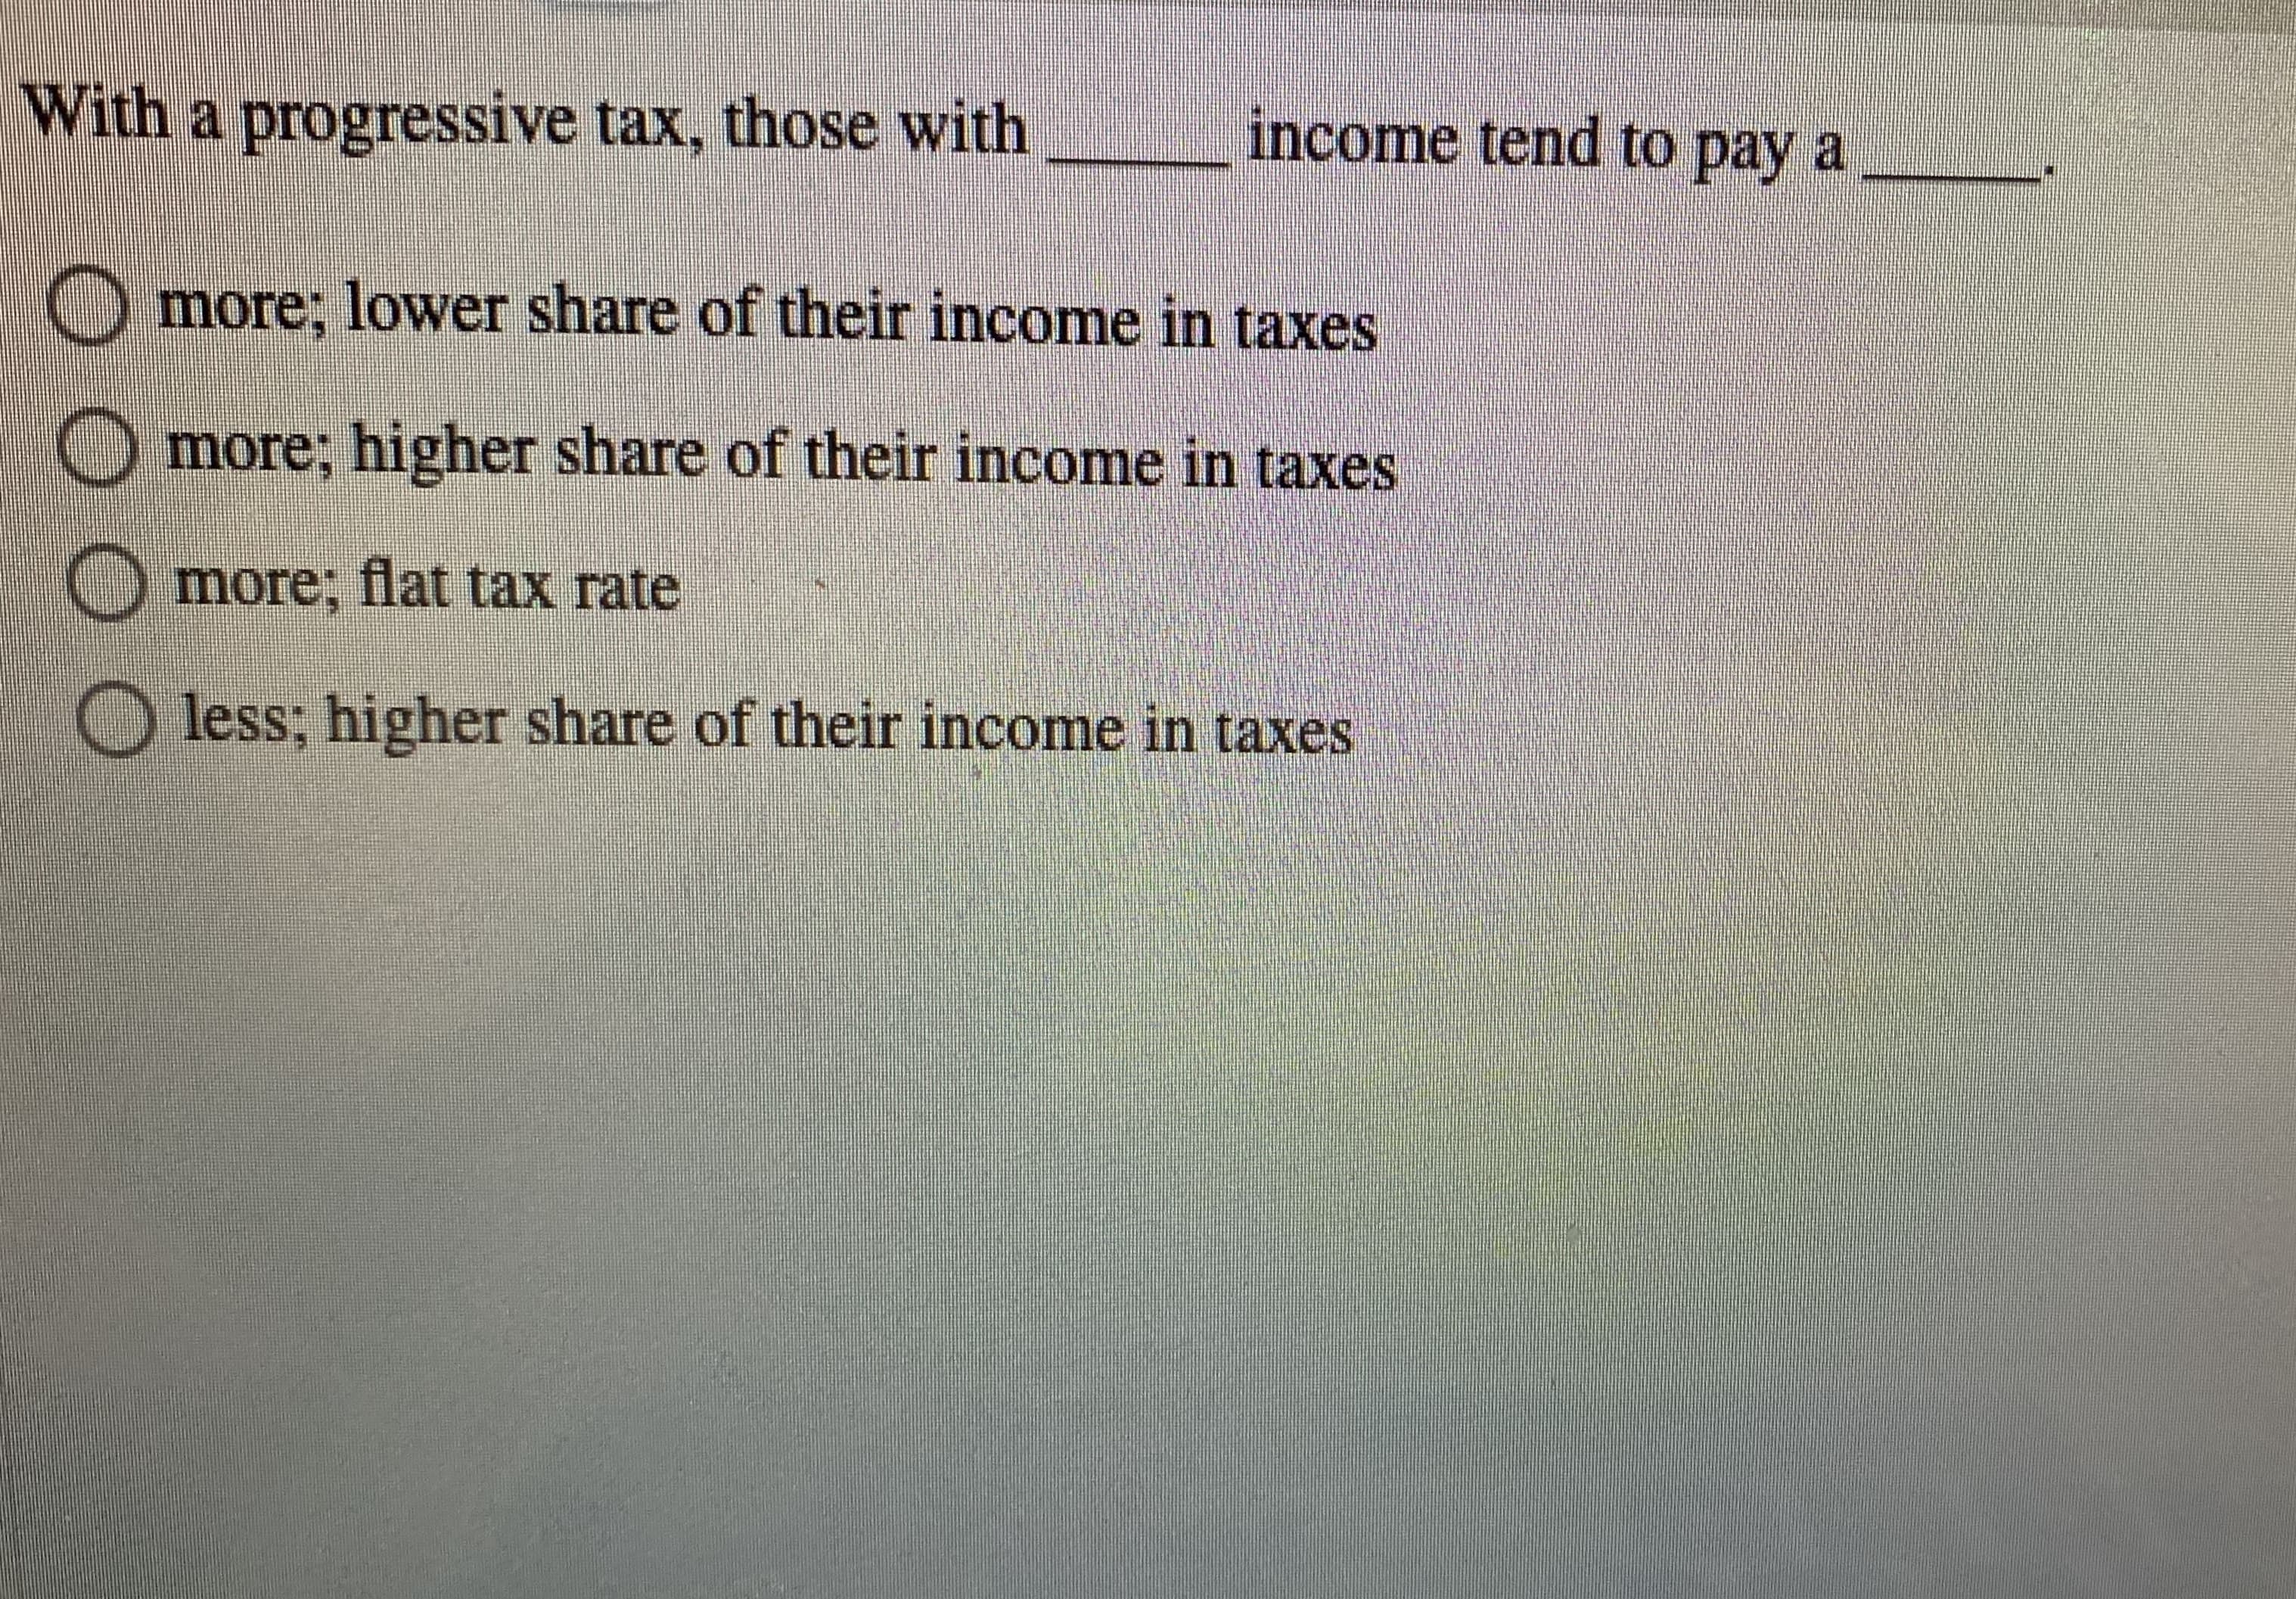 With a progressive tax, those with
income tend to pay a
